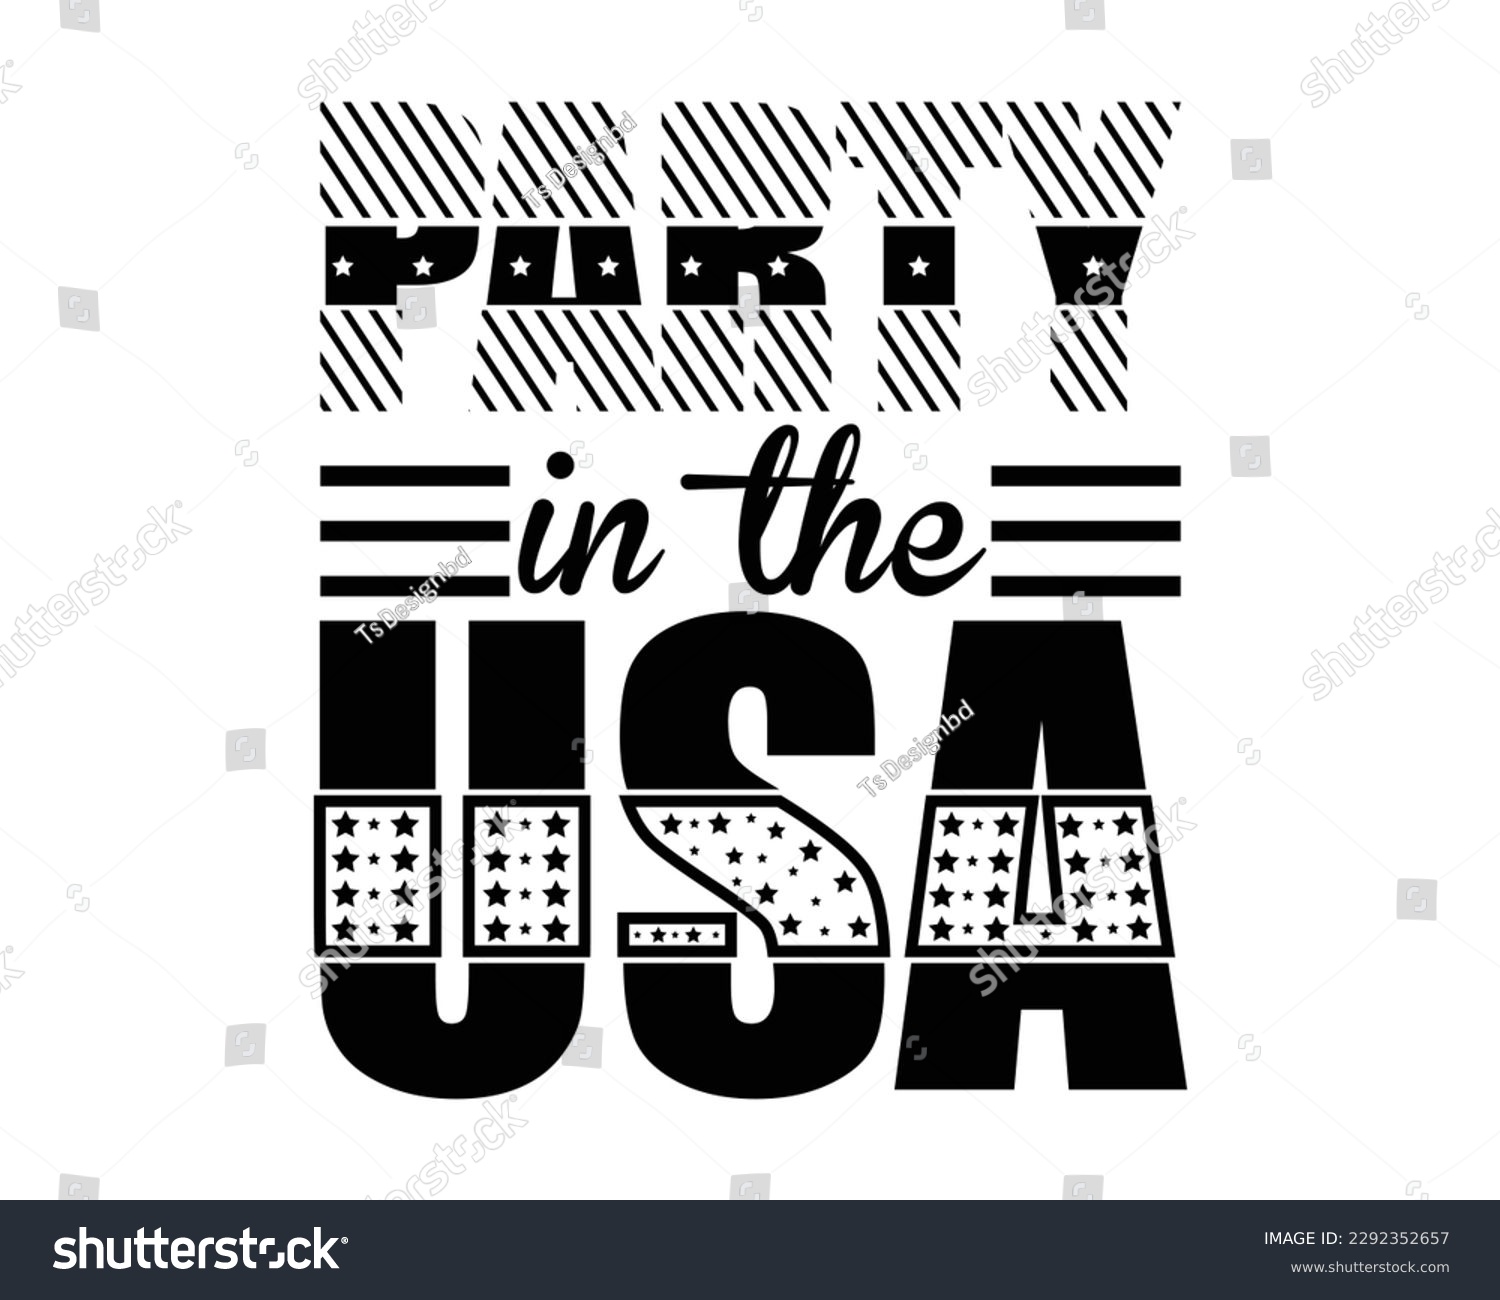 SVG of Party In The Usa Svg Design Files,Memorial Day Svg, Patriotic Svg, American Flag Svg, USA Svg,Happy memorial day,Veteran t-shirt design, svg